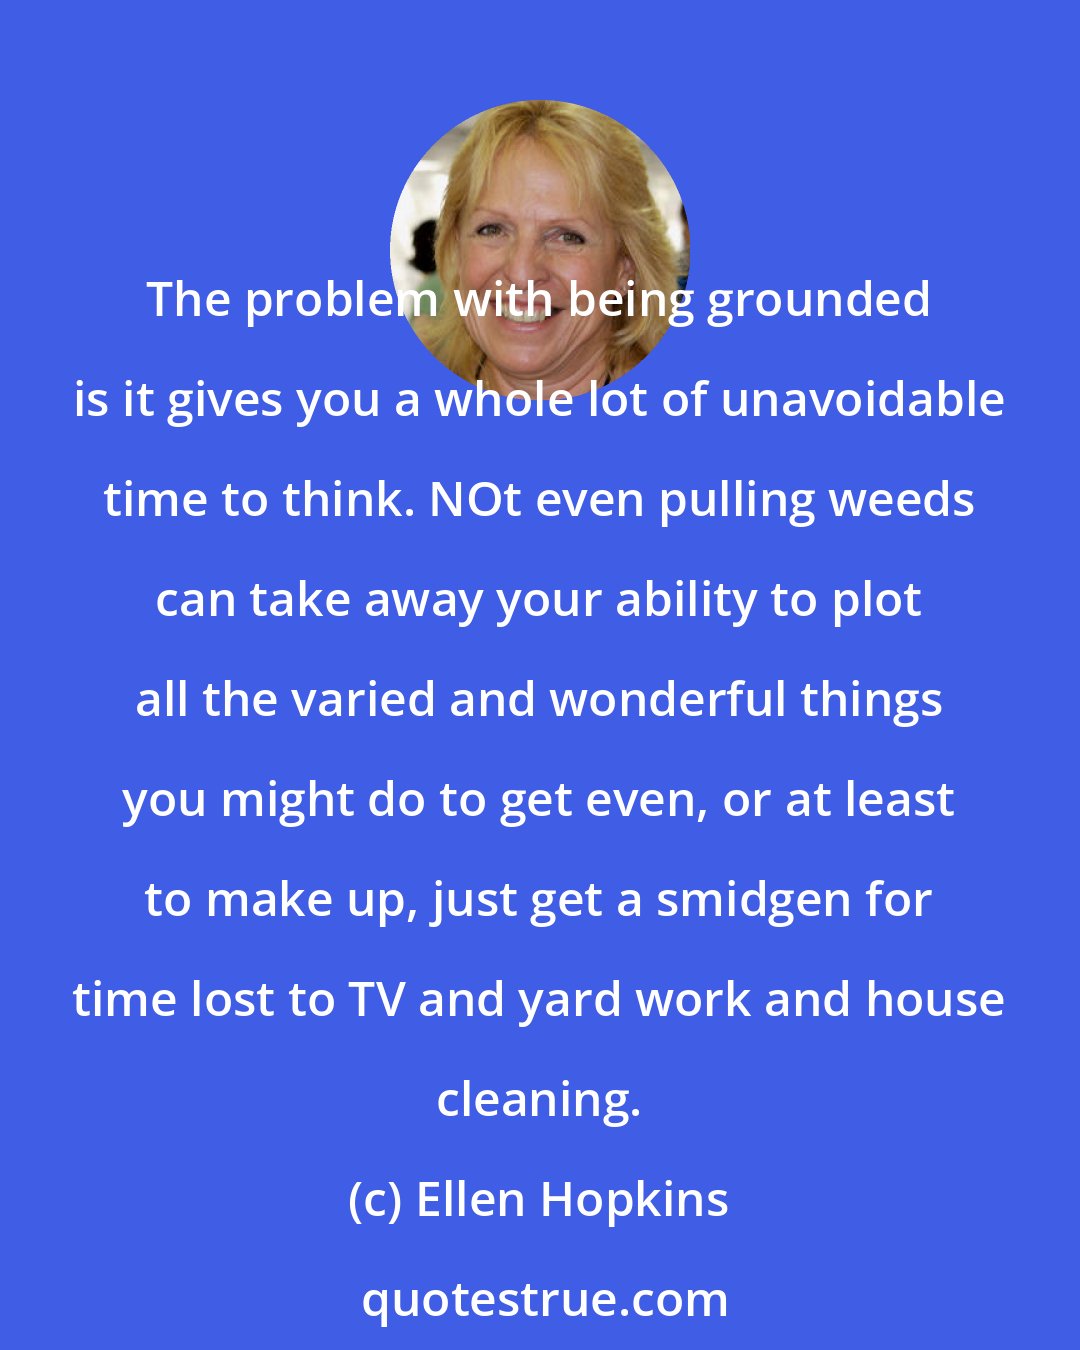 Ellen Hopkins: The problem with being grounded is it gives you a whole lot of unavoidable time to think. NOt even pulling weeds can take away your ability to plot all the varied and wonderful things you might do to get even, or at least to make up, just get a smidgen for time lost to TV and yard work and house cleaning.